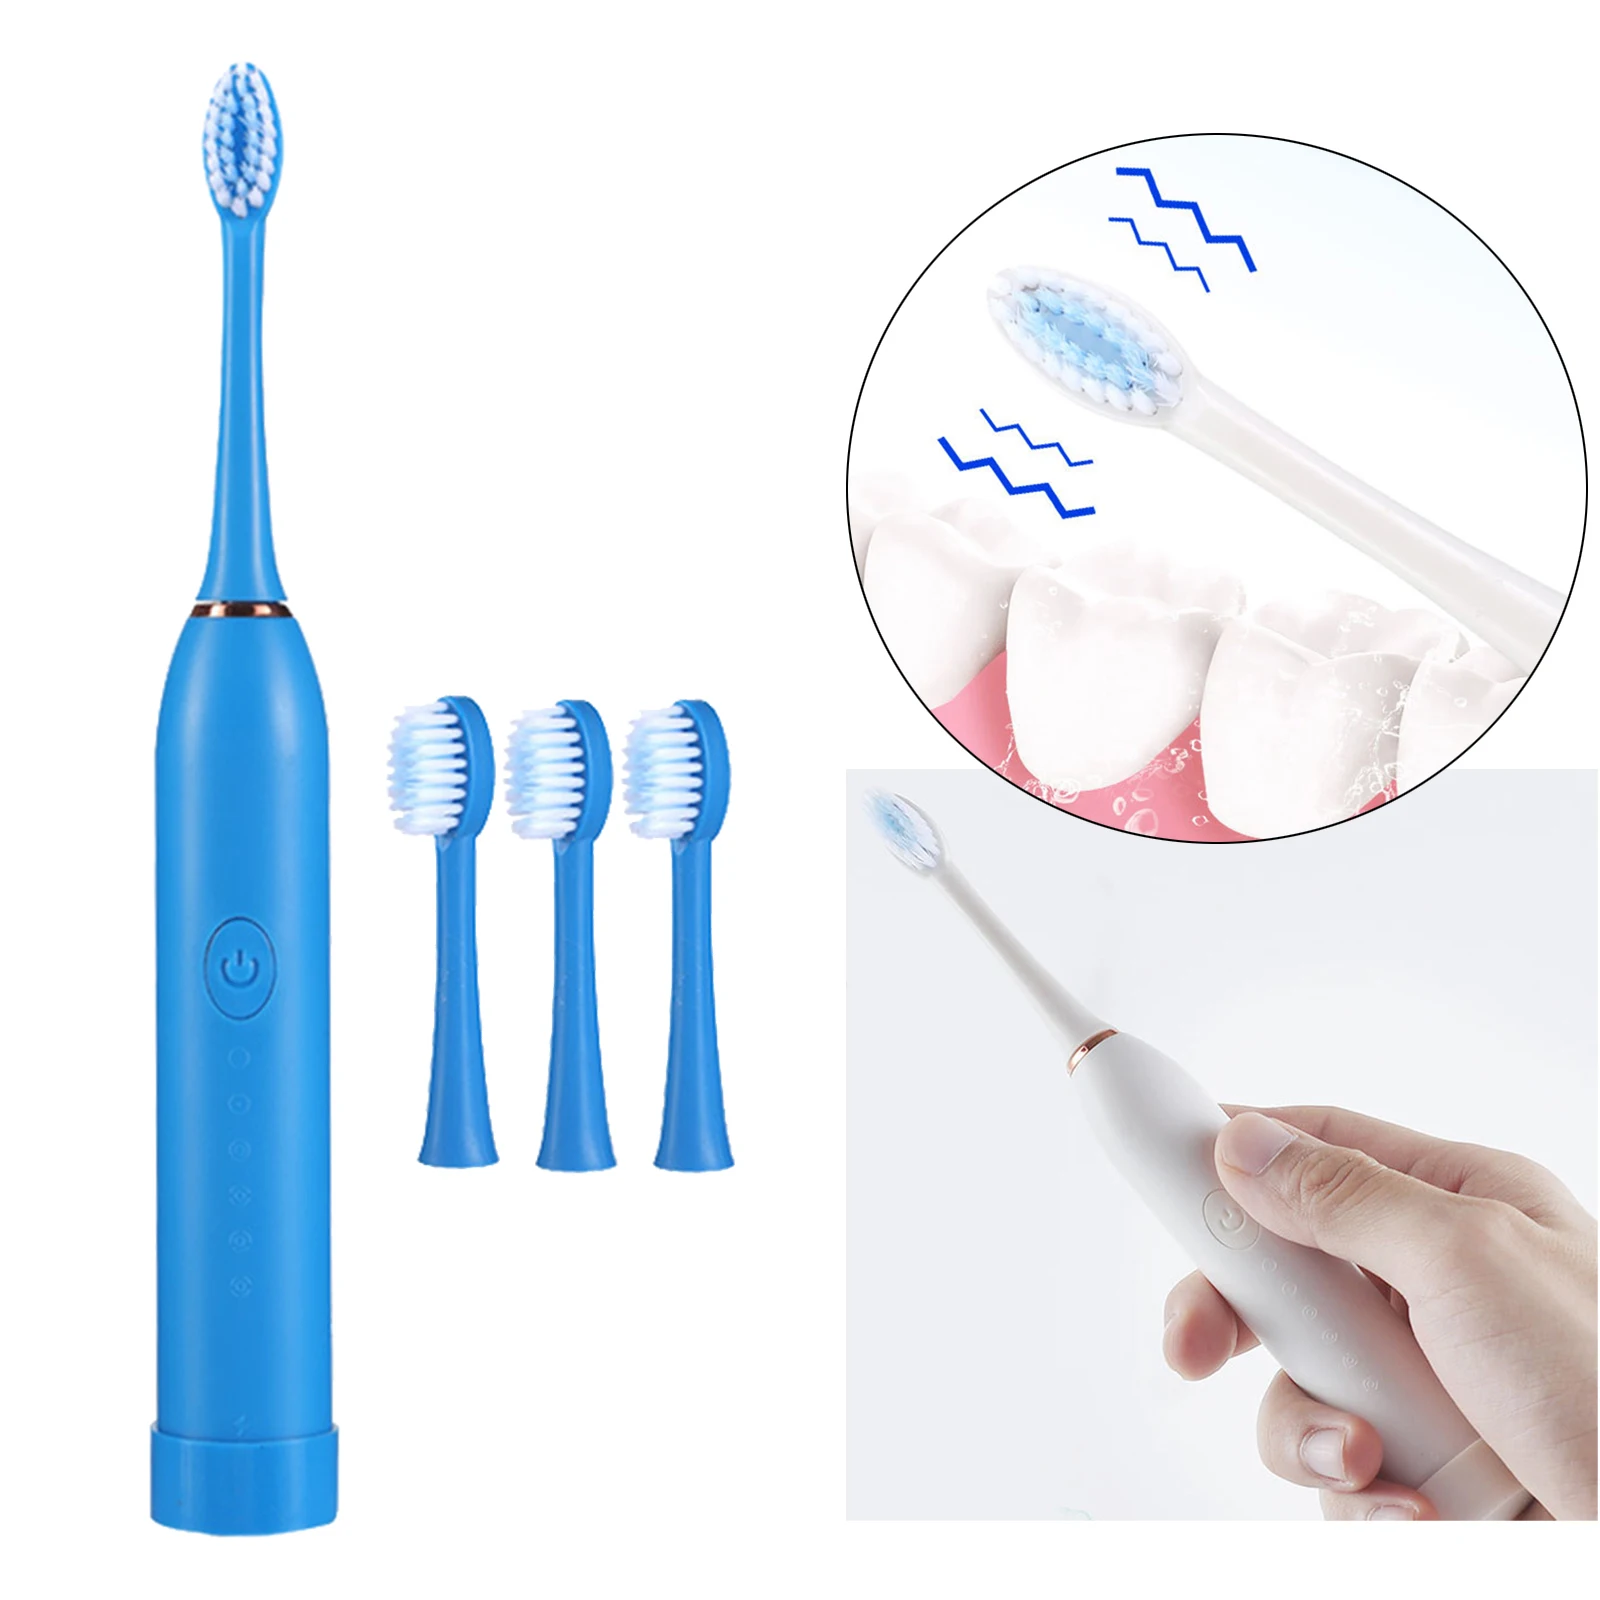 USB Charging Ultrasonic Electric Toothbrush Automatic Intelligent Timing, Sonic Vibration Zone Change Reminder